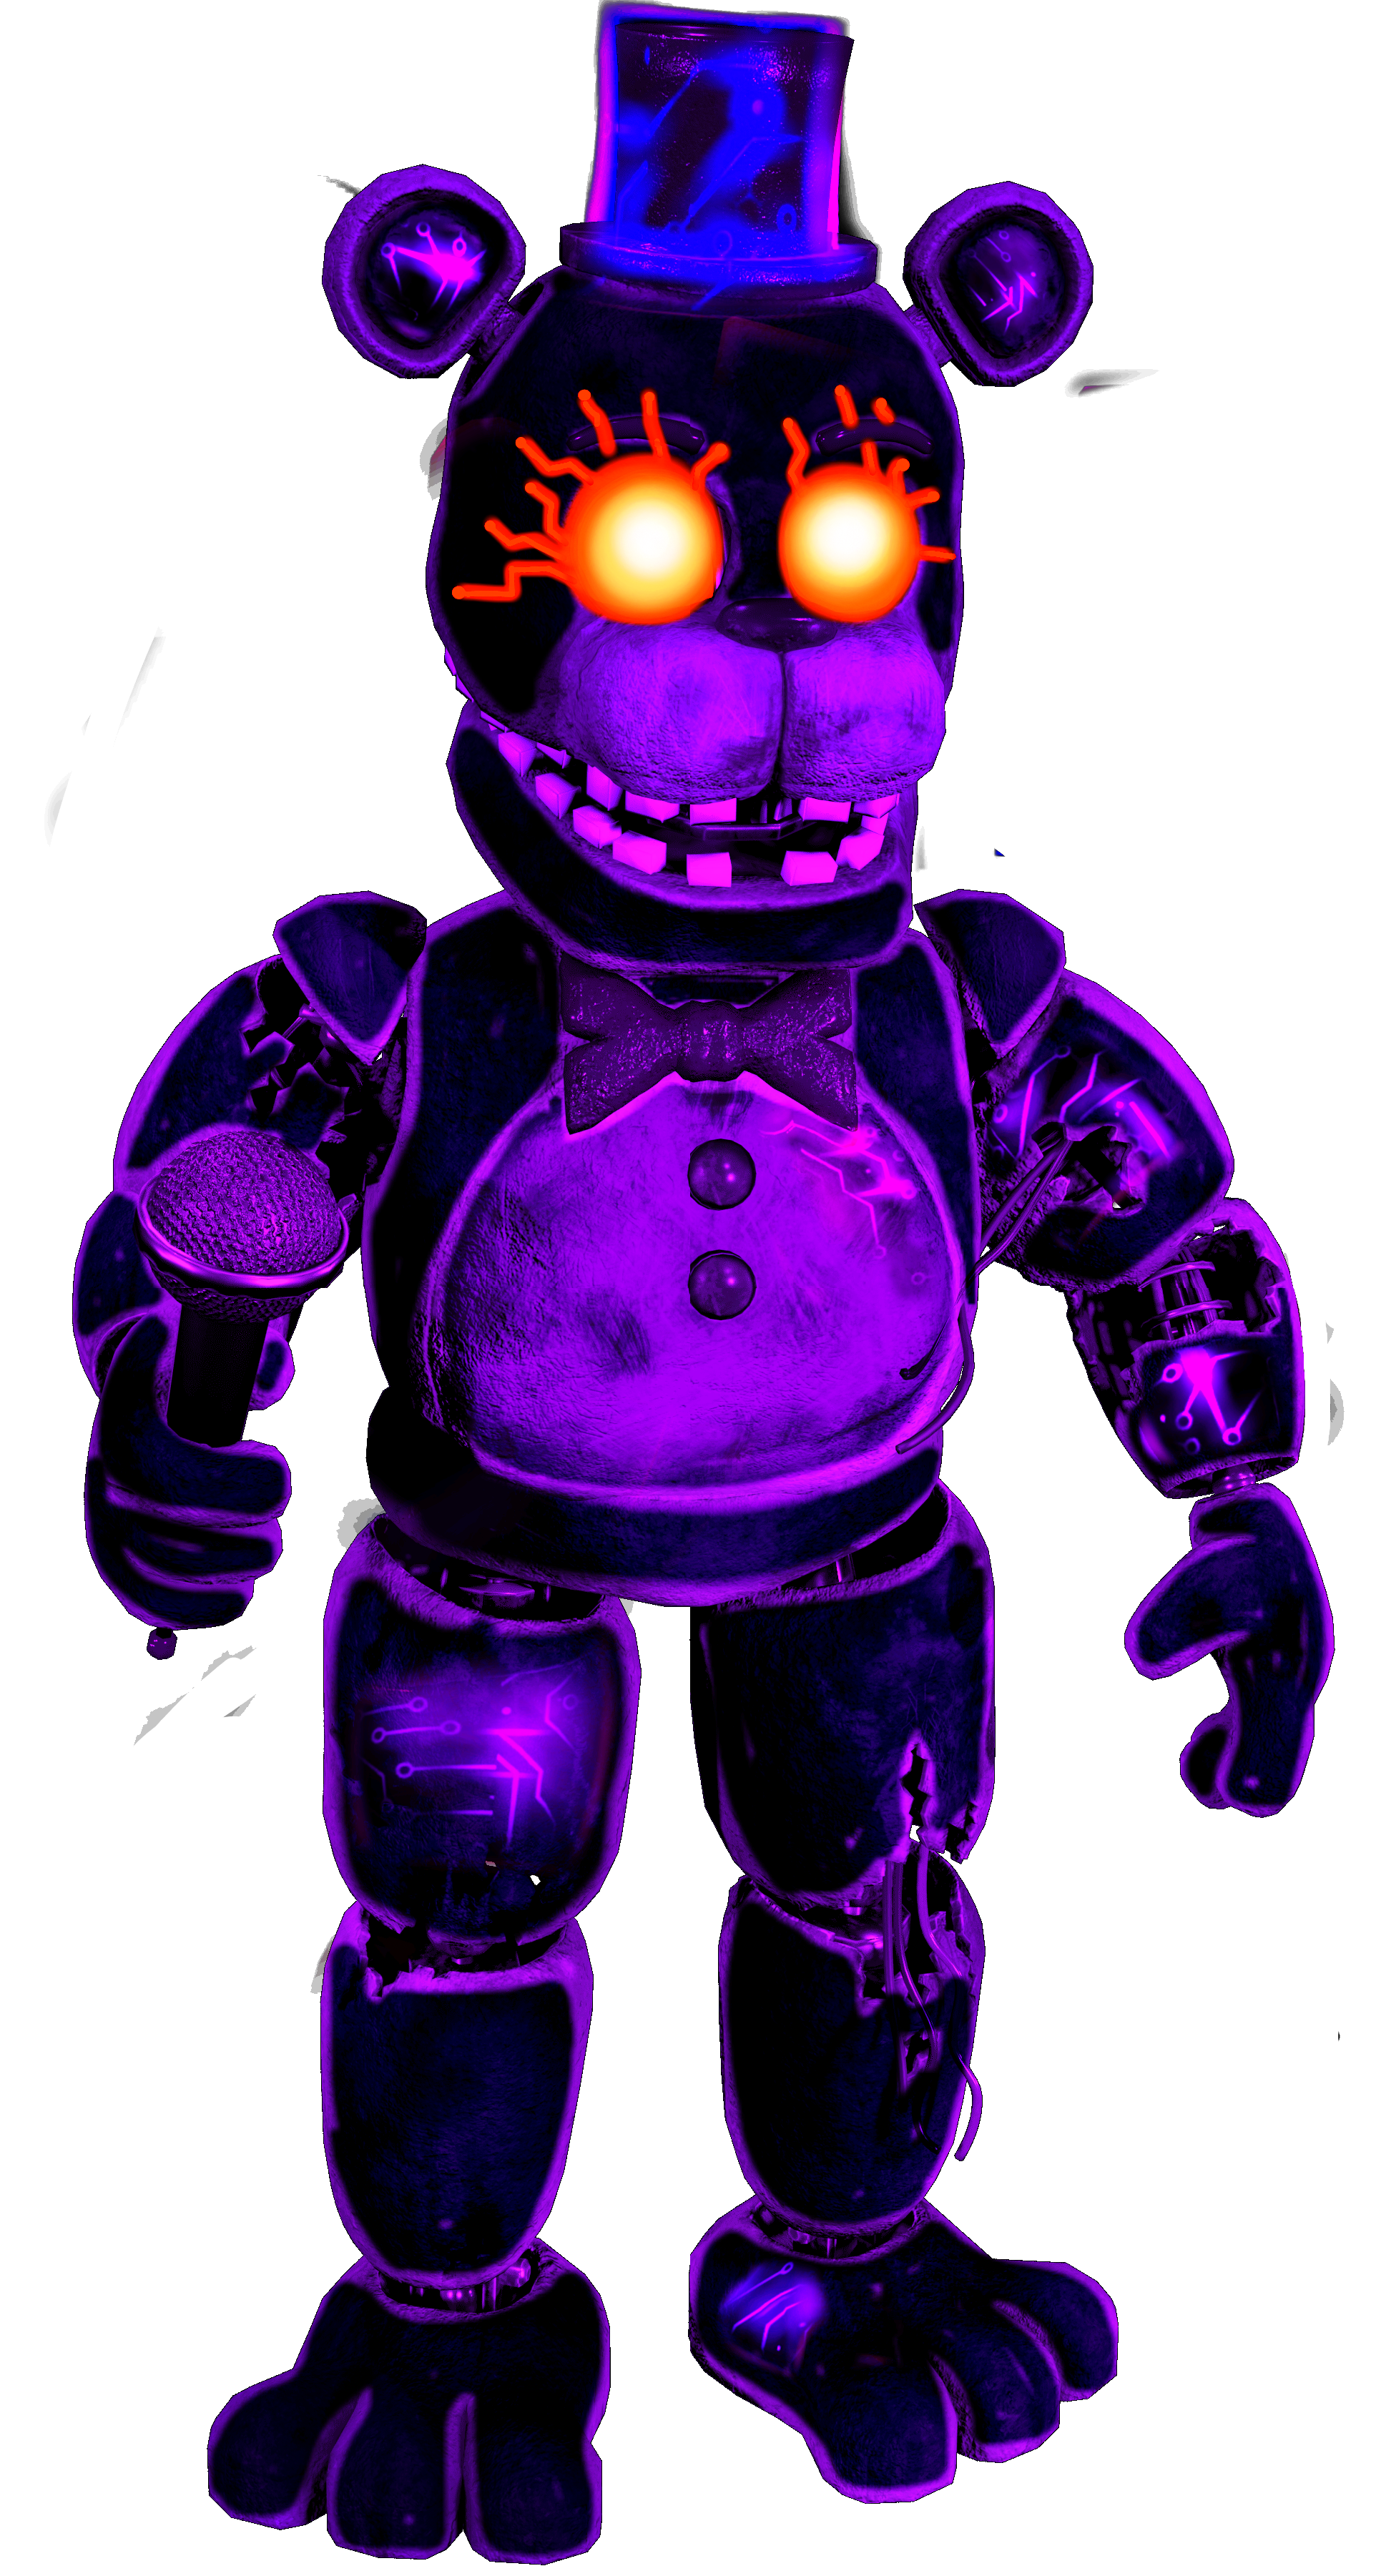 Pixilart - Withered Freddy by DigiArcade